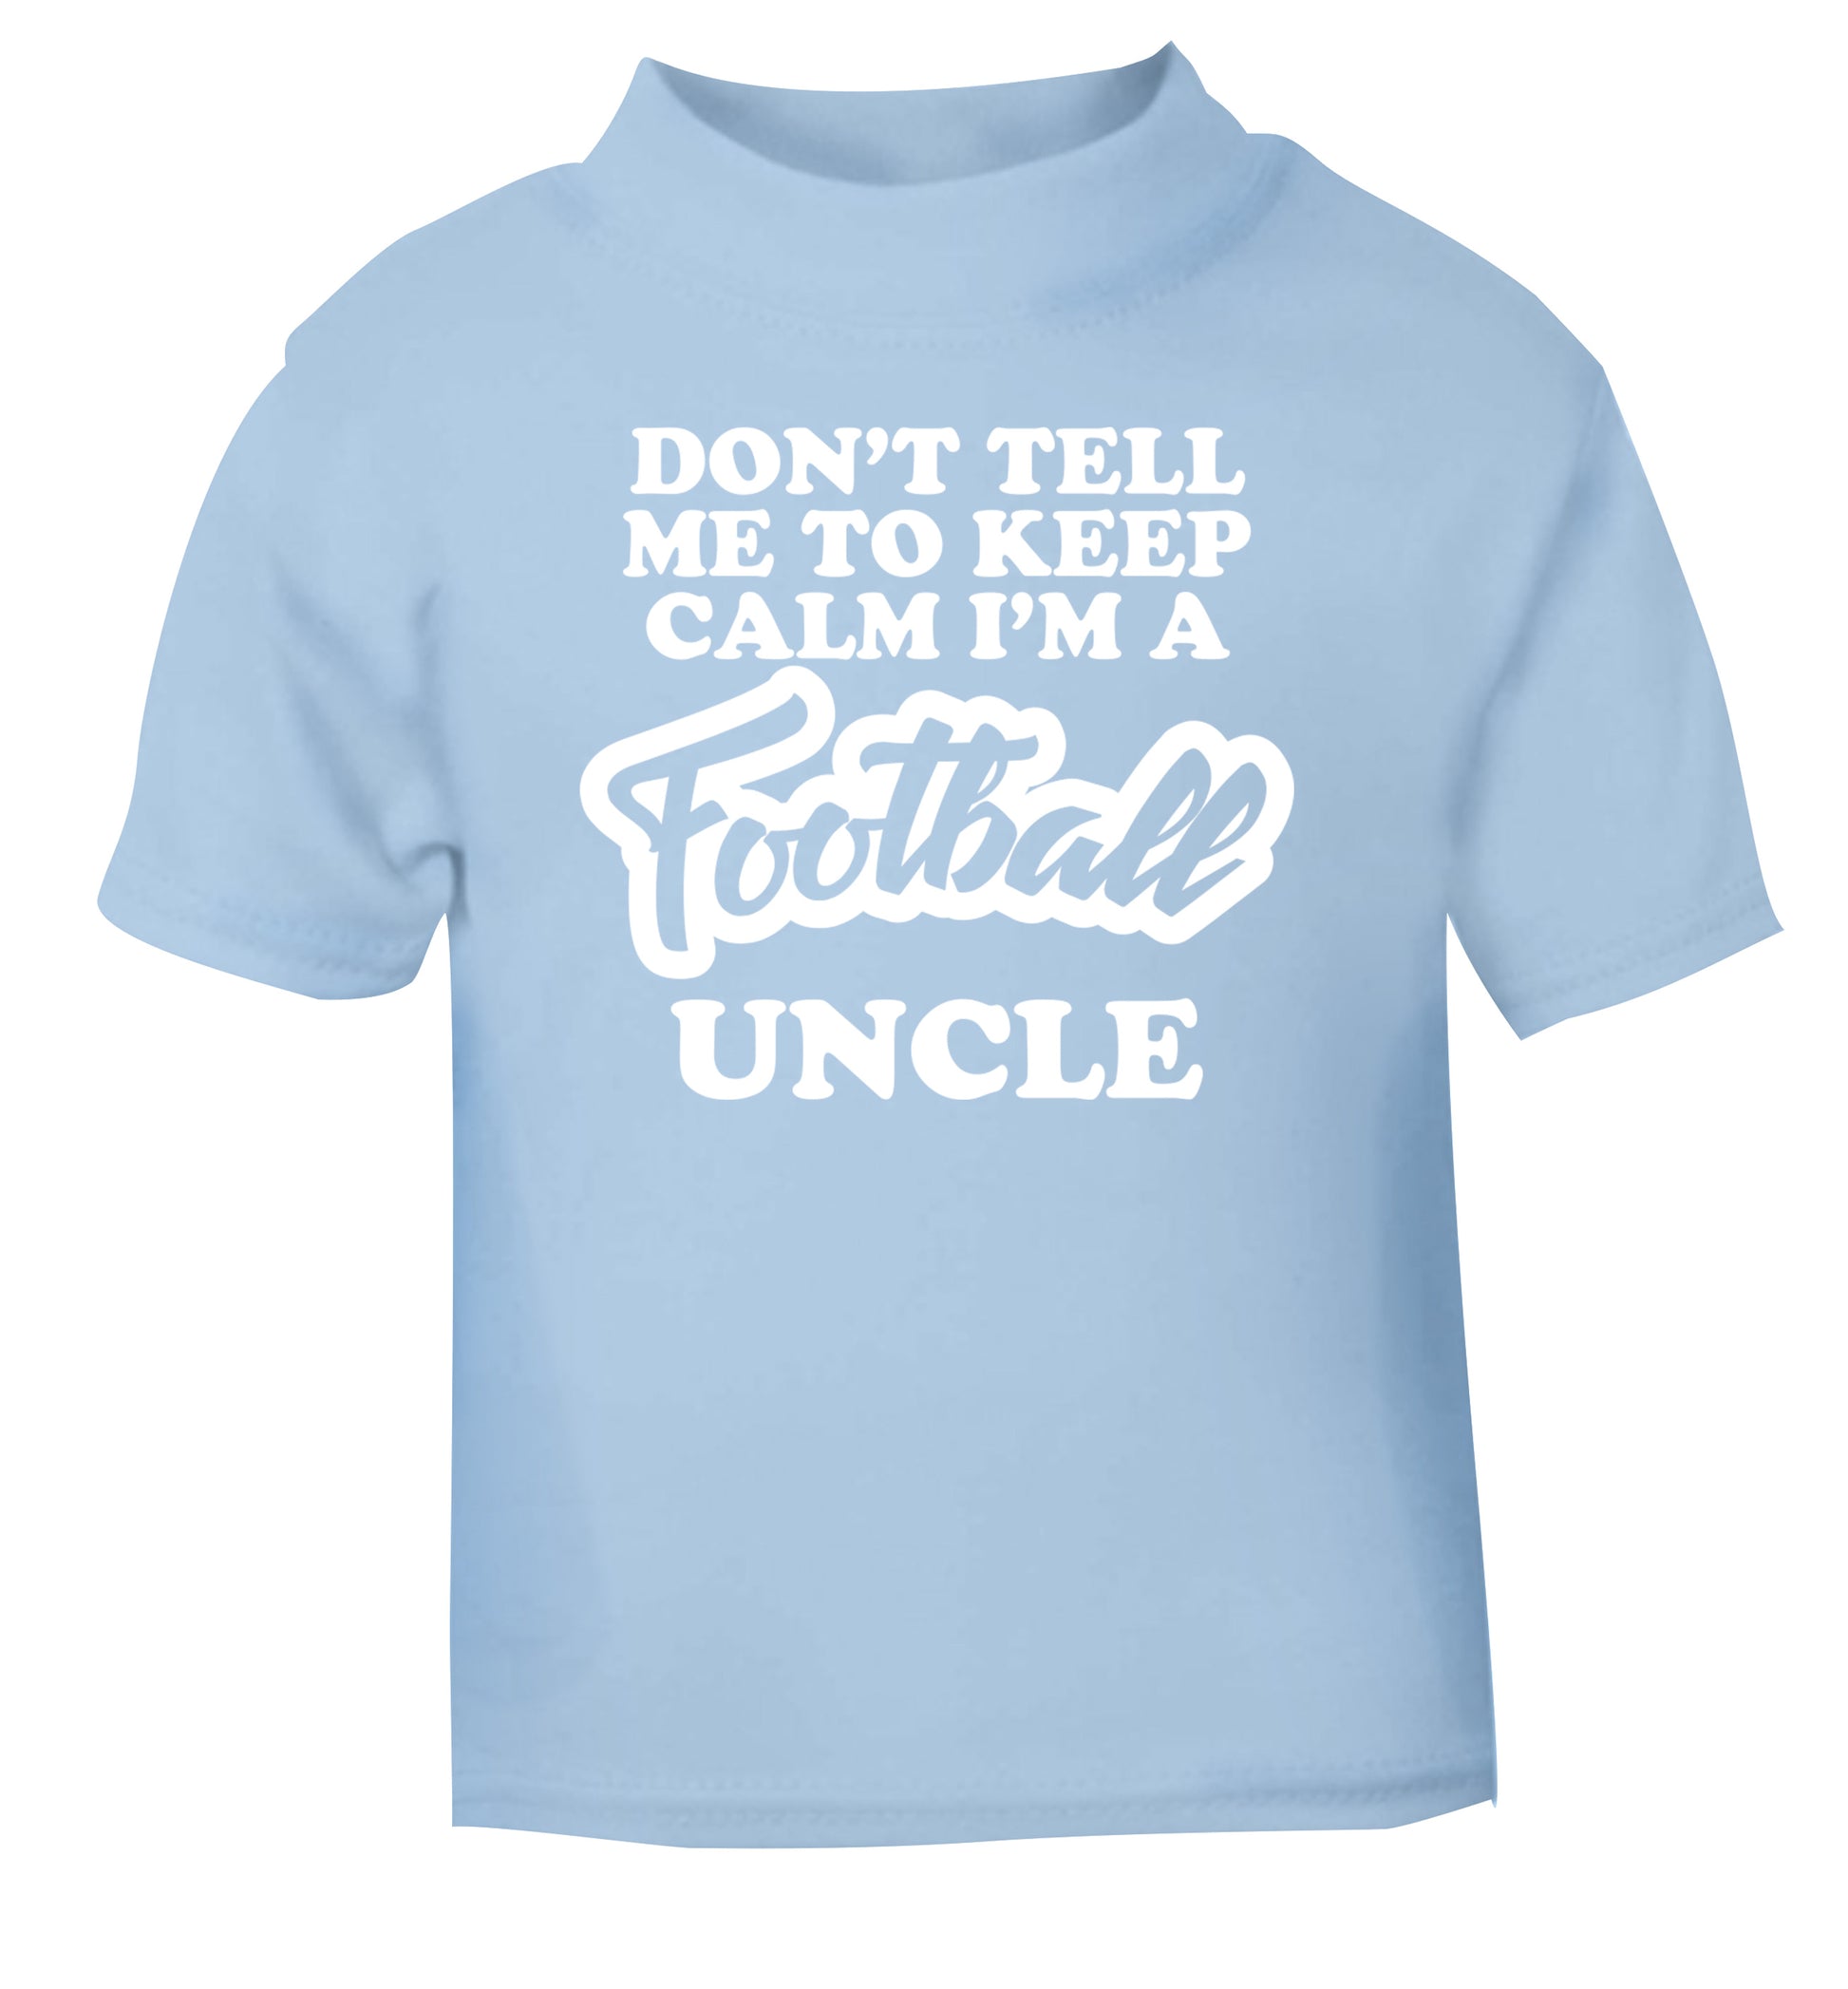 Worlds most amazing football uncle light blue Baby Toddler Tshirt 2 Years